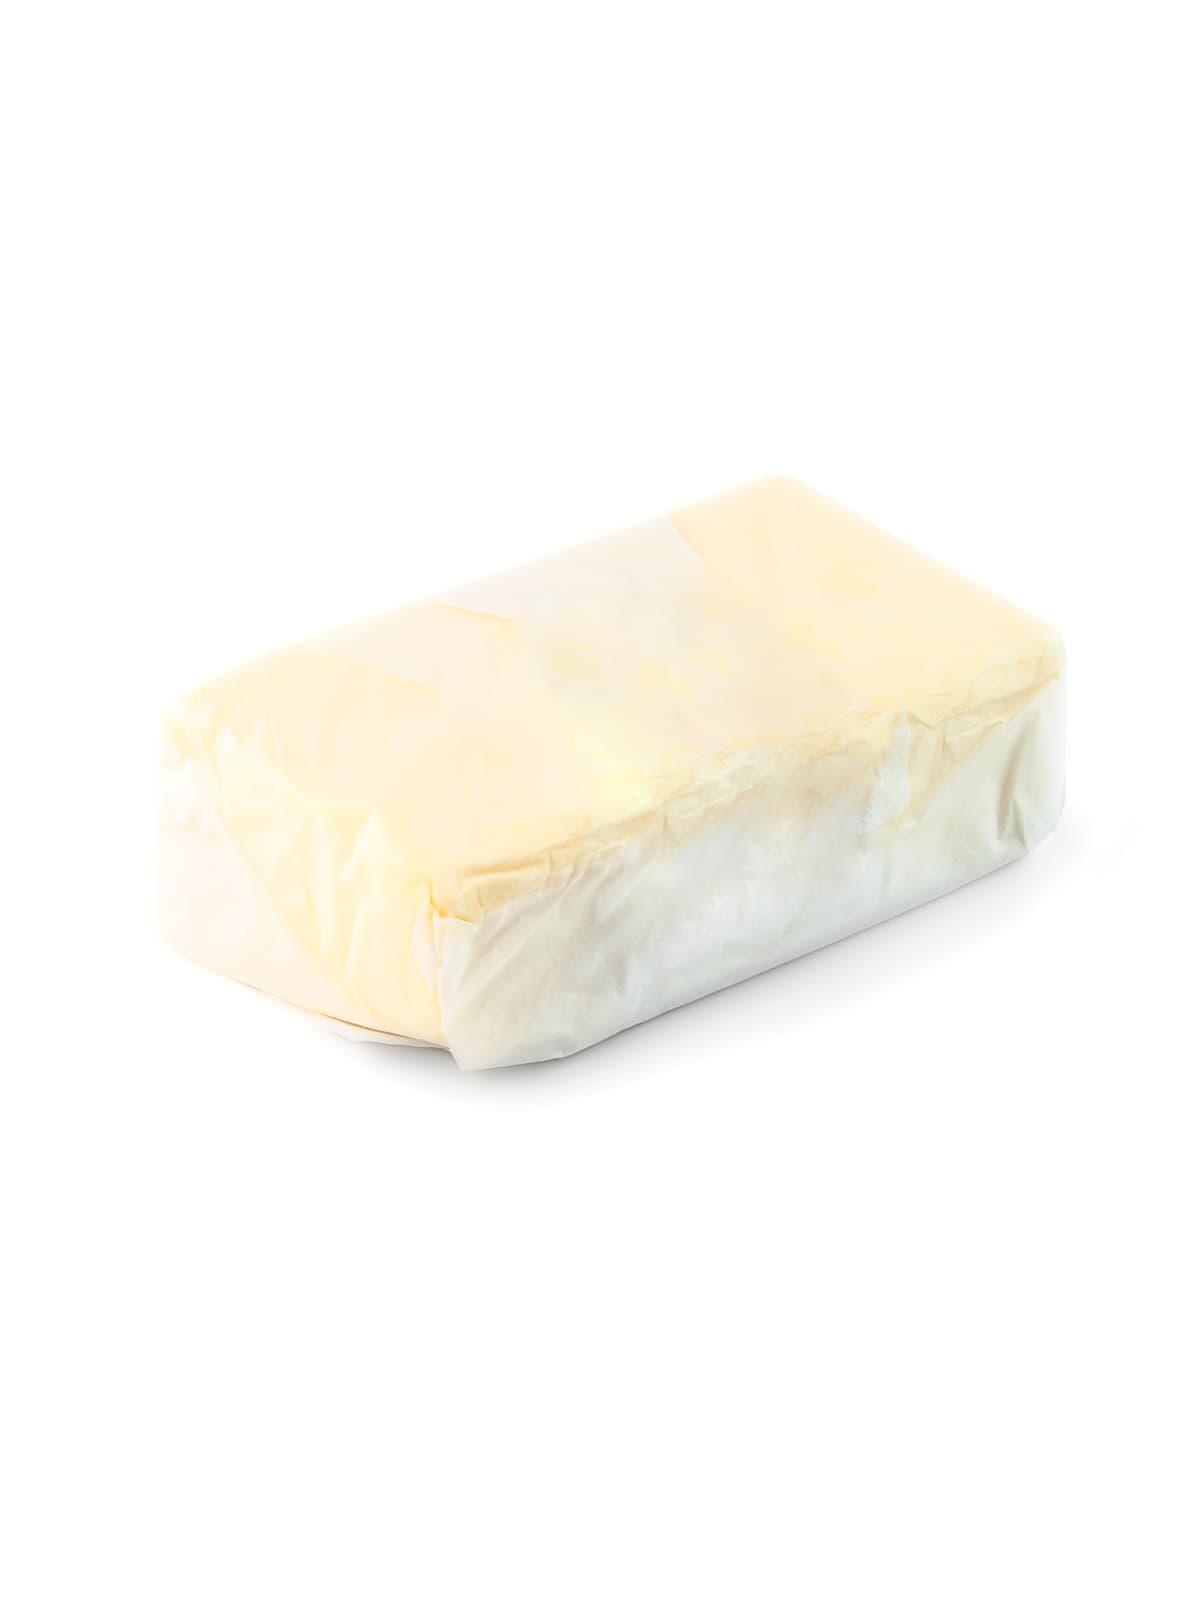 Block of butter in craft paper on white background, top view